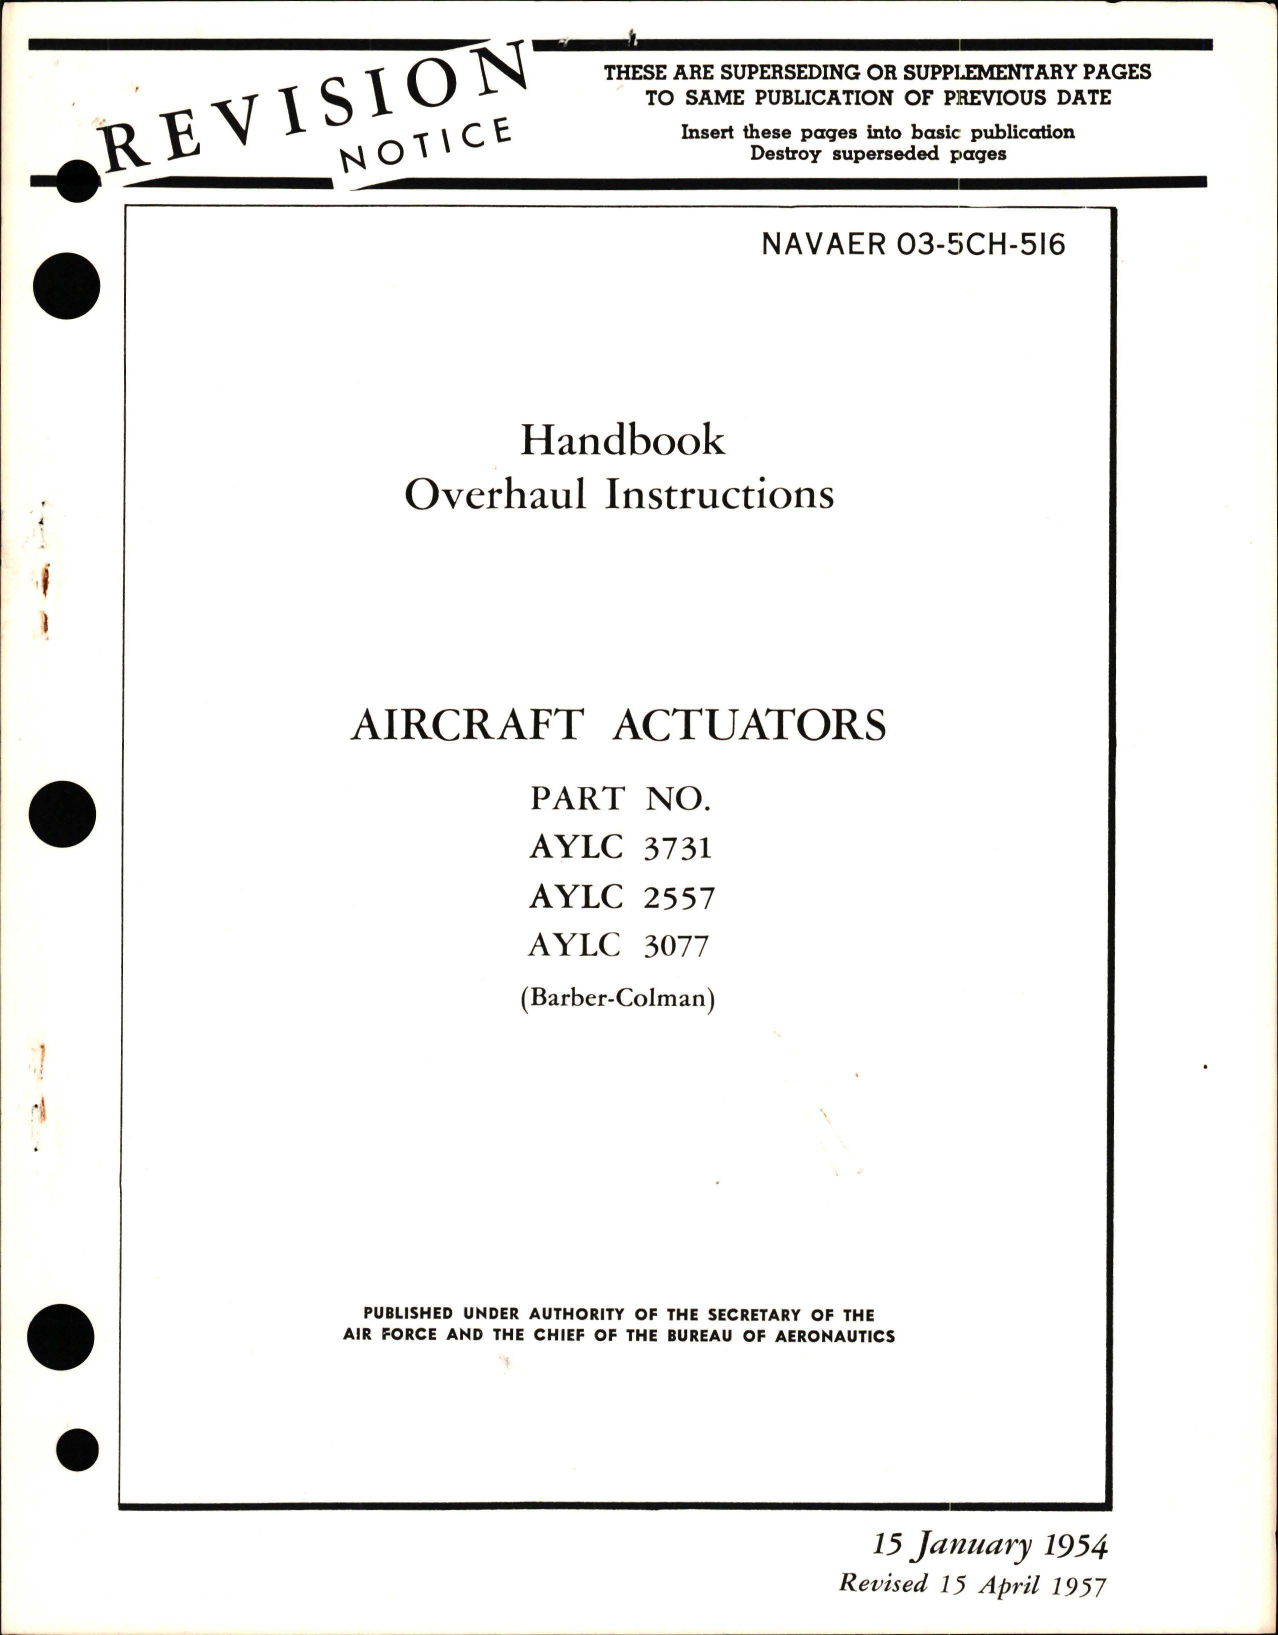 Sample page 1 from AirCorps Library document: Overhaul Instructions for Actuators - Parts AYLC 3731, AYLC 2557, and AYLC 3077 